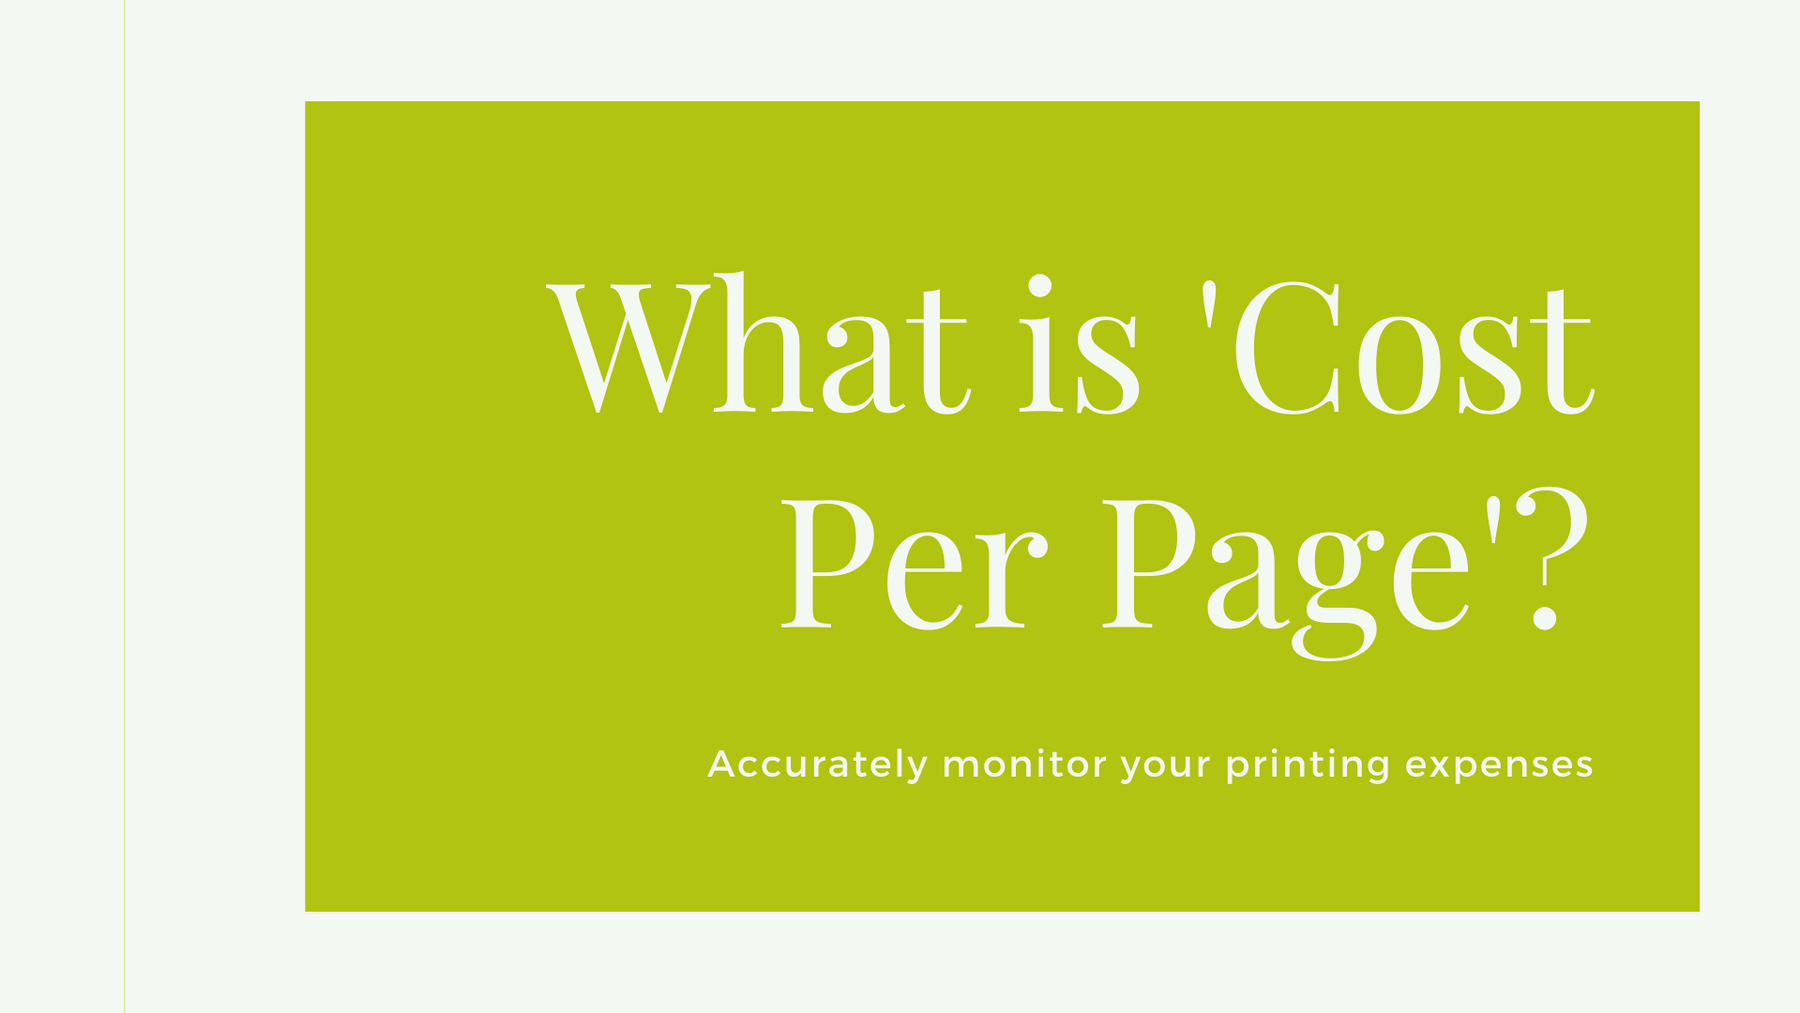 Image that states 'What is cost per page? Accurately monitor your printing expenses'